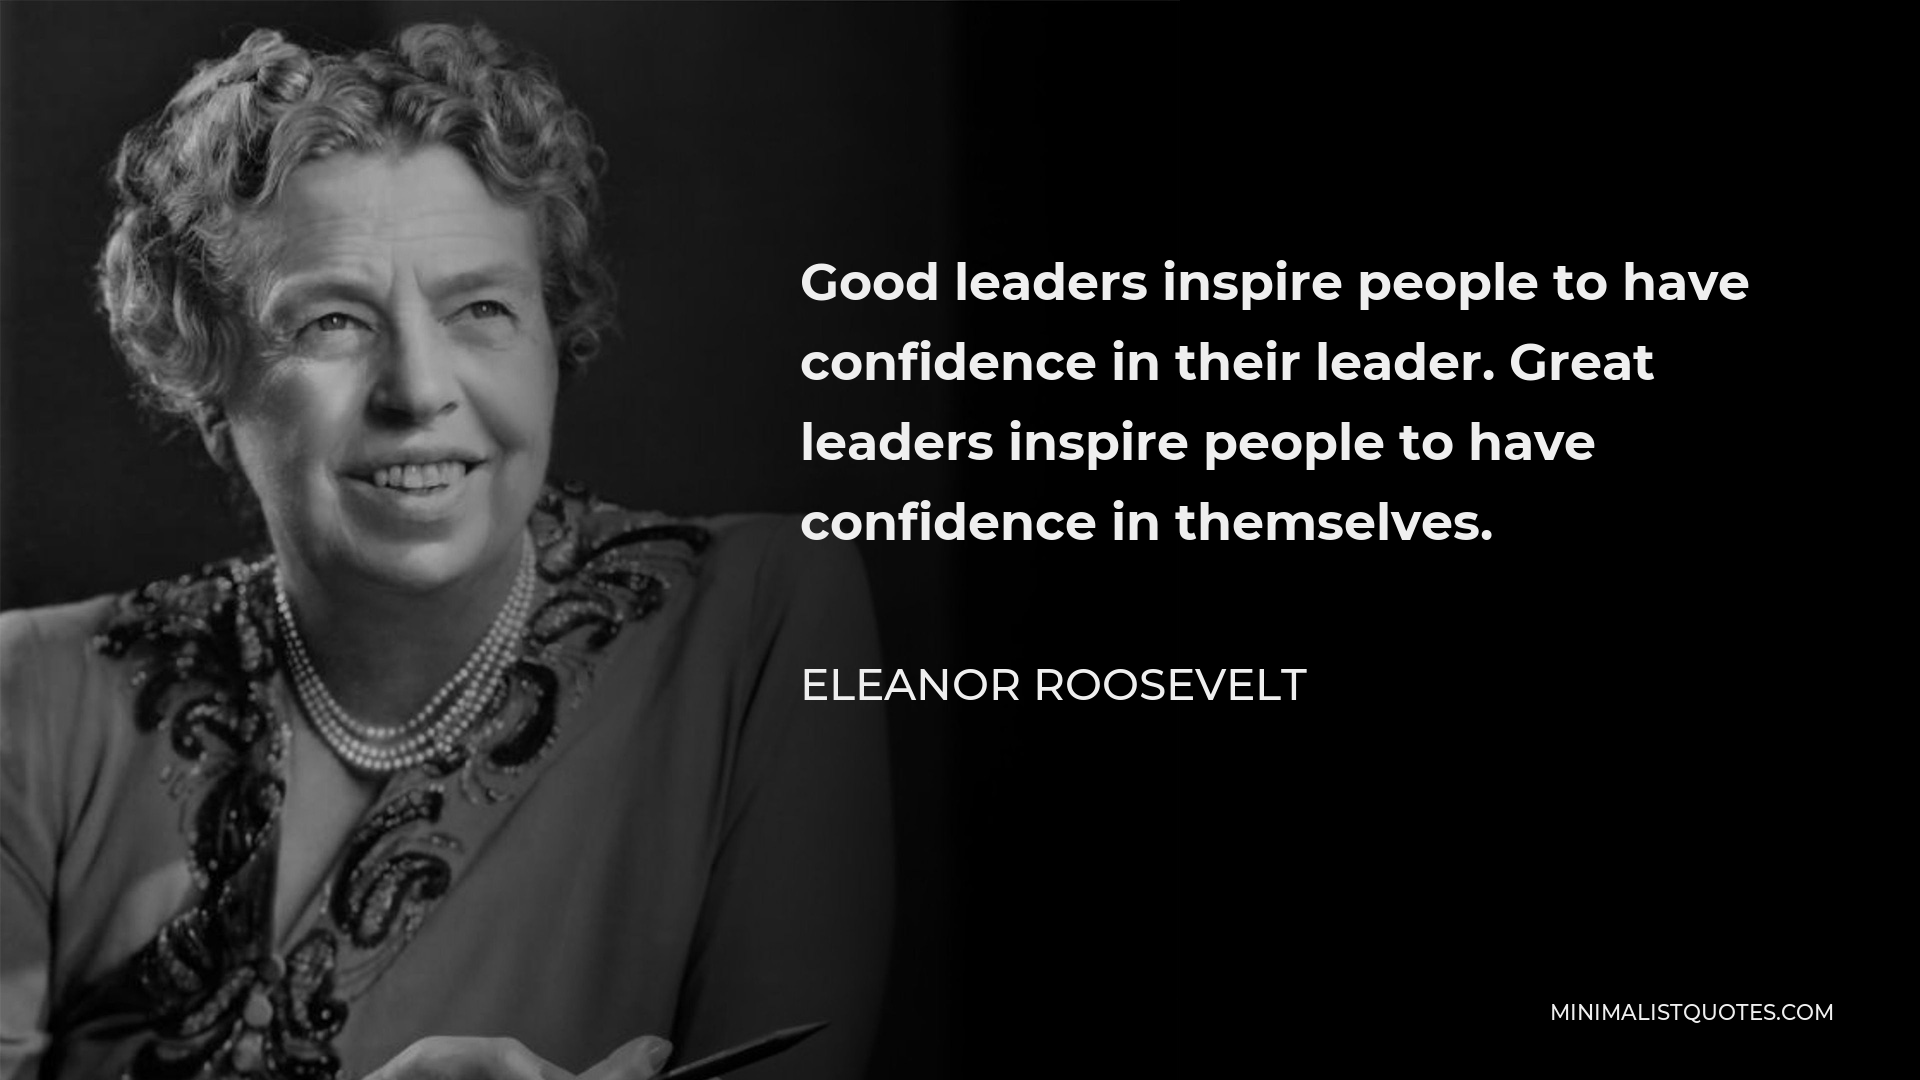 Eleanor Roosevelt Quote - Good leaders inspire people to have confidence in their leader. Great leaders inspire people to have confidence in themselves.